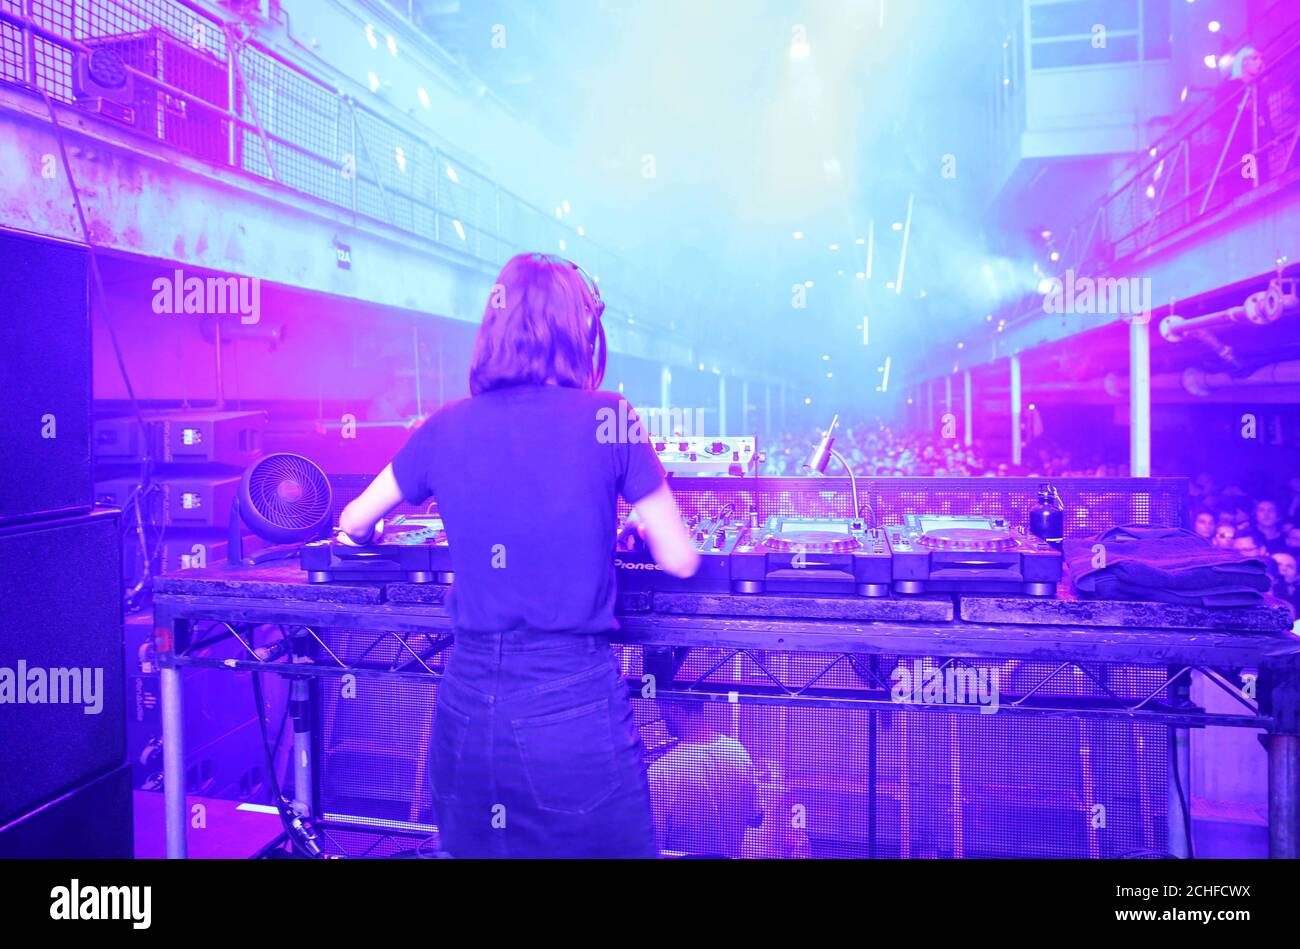 EDITORIAL USE ONLY Techno DJ Amelie Lens performs at the launch party of a  season of upcoming electronic events at Printworks in Surrey Quays, London  Stock Photo - Alamy